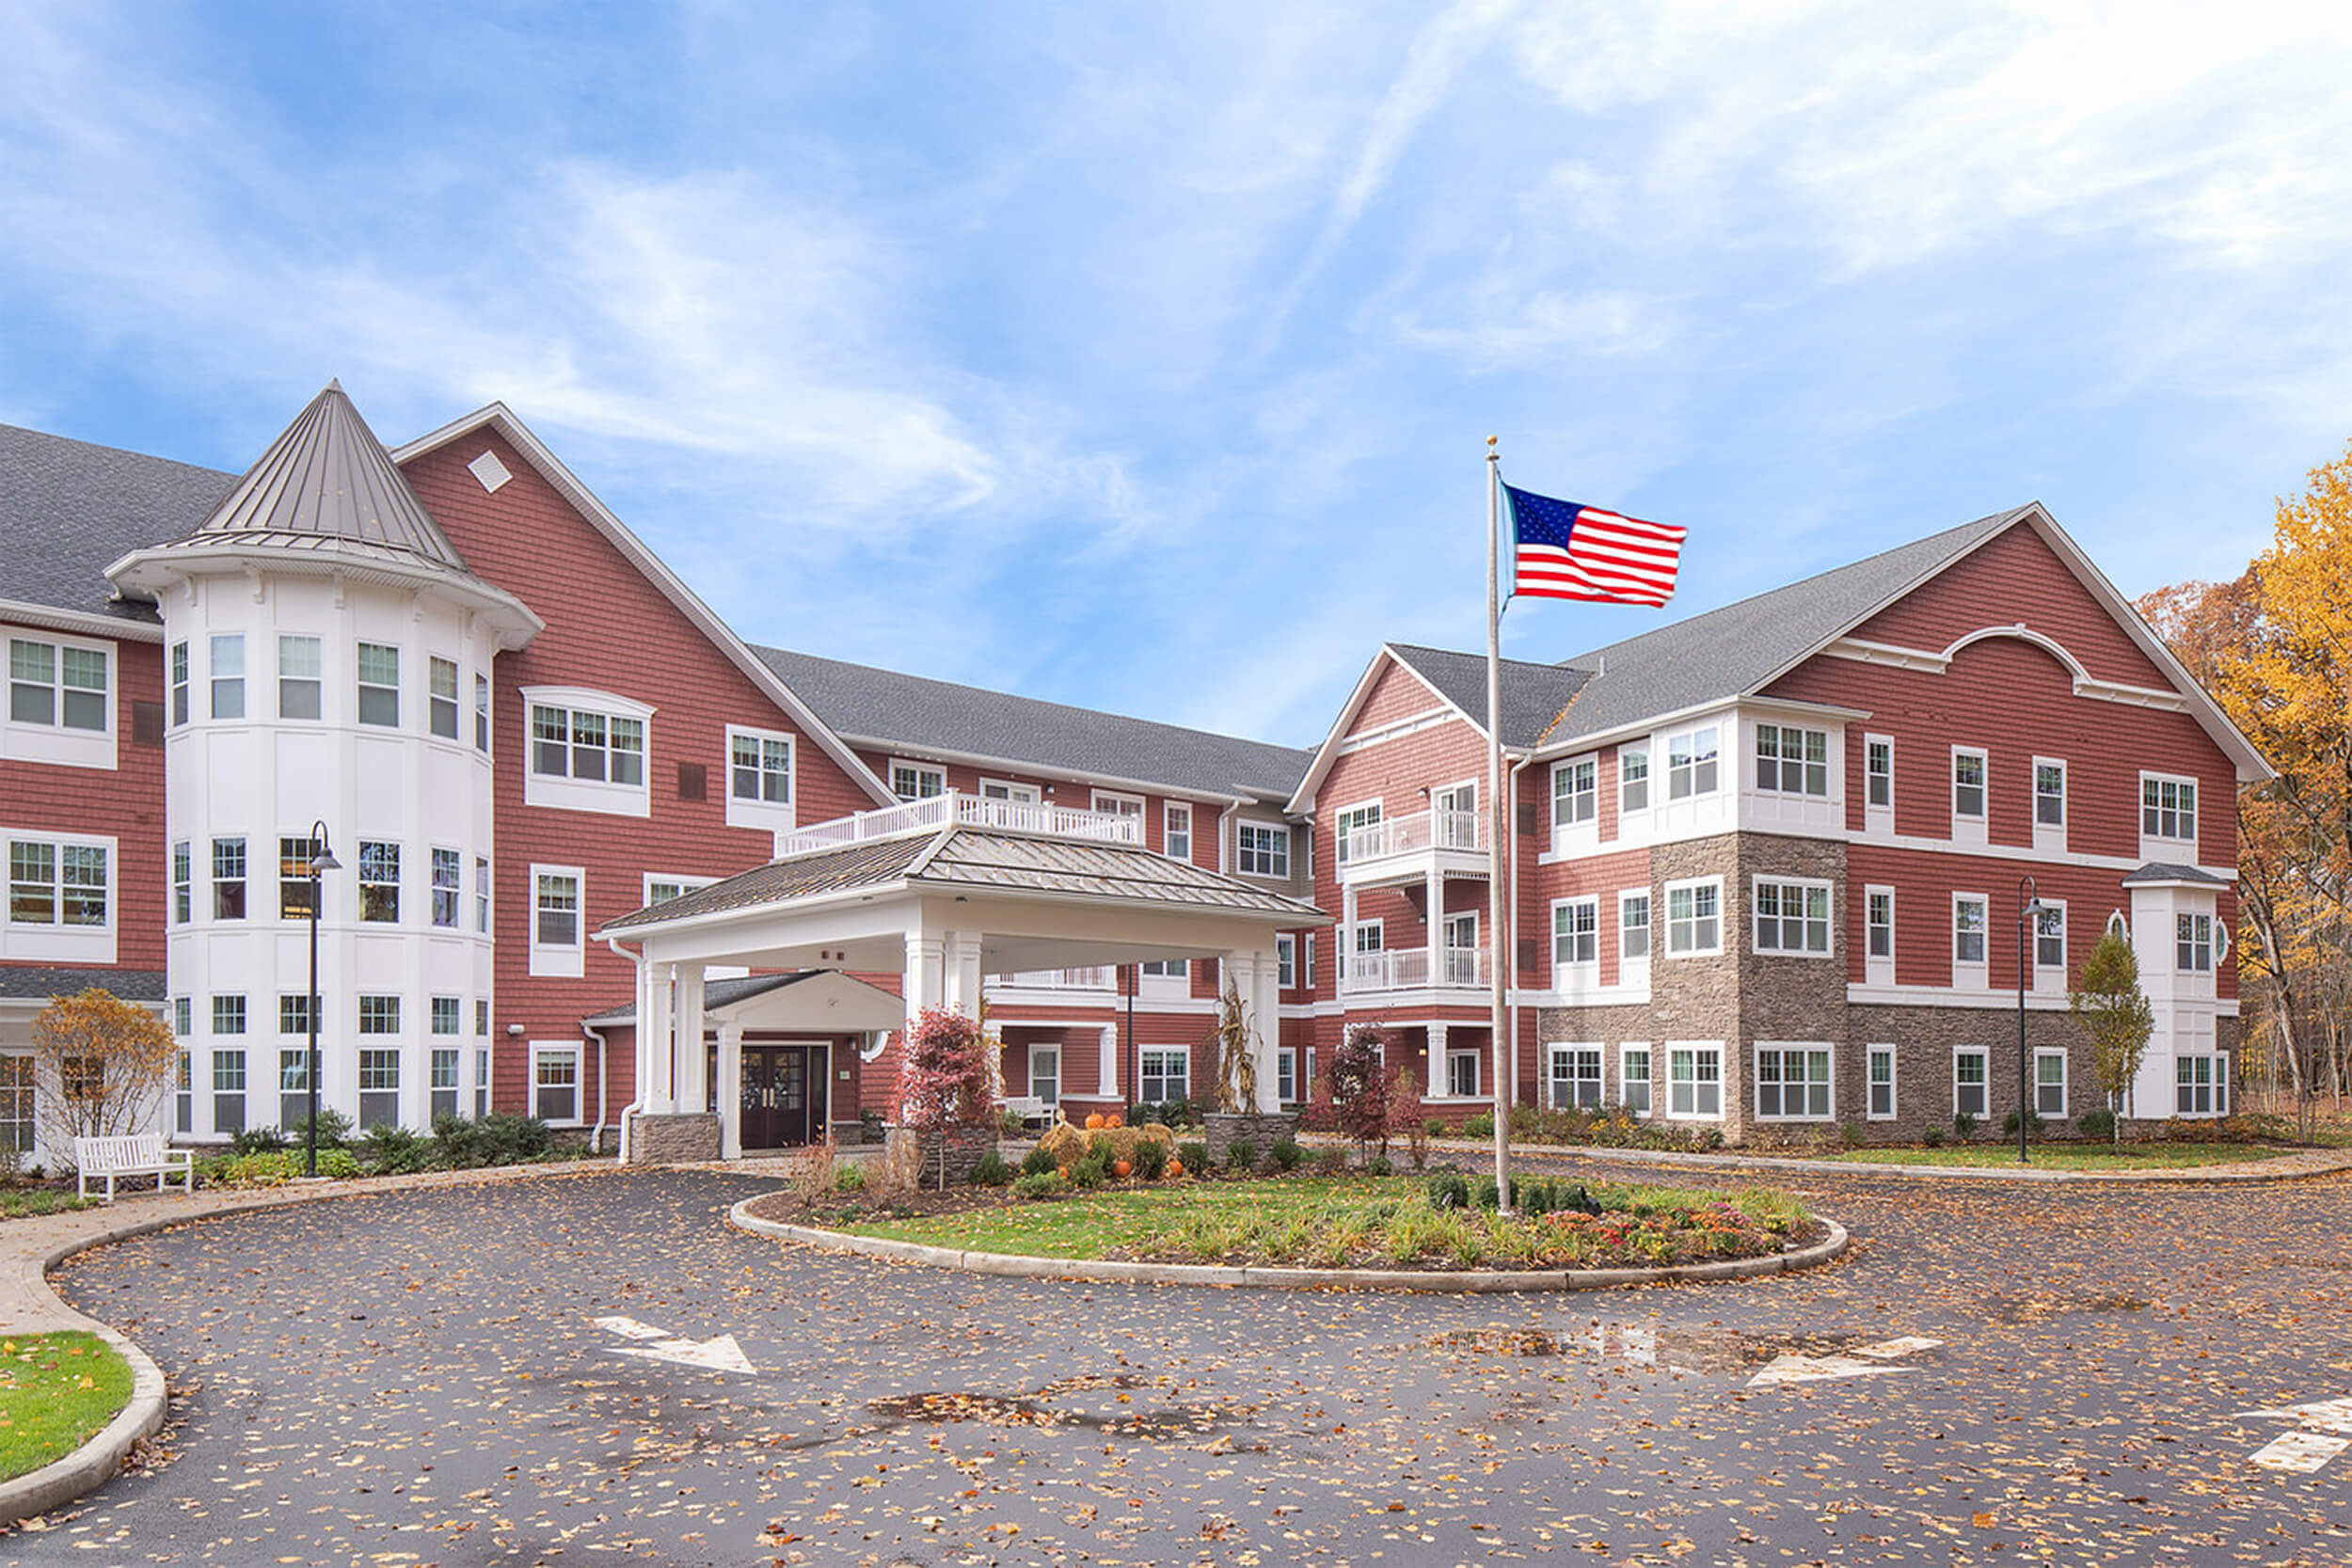 Exterior daytime view of a senior living facility entrance. The buildings feature red shingle siding with white trim. A roundabout driveway is in front of the entrance, with an American flag atop a flagpole in the center grassy area.